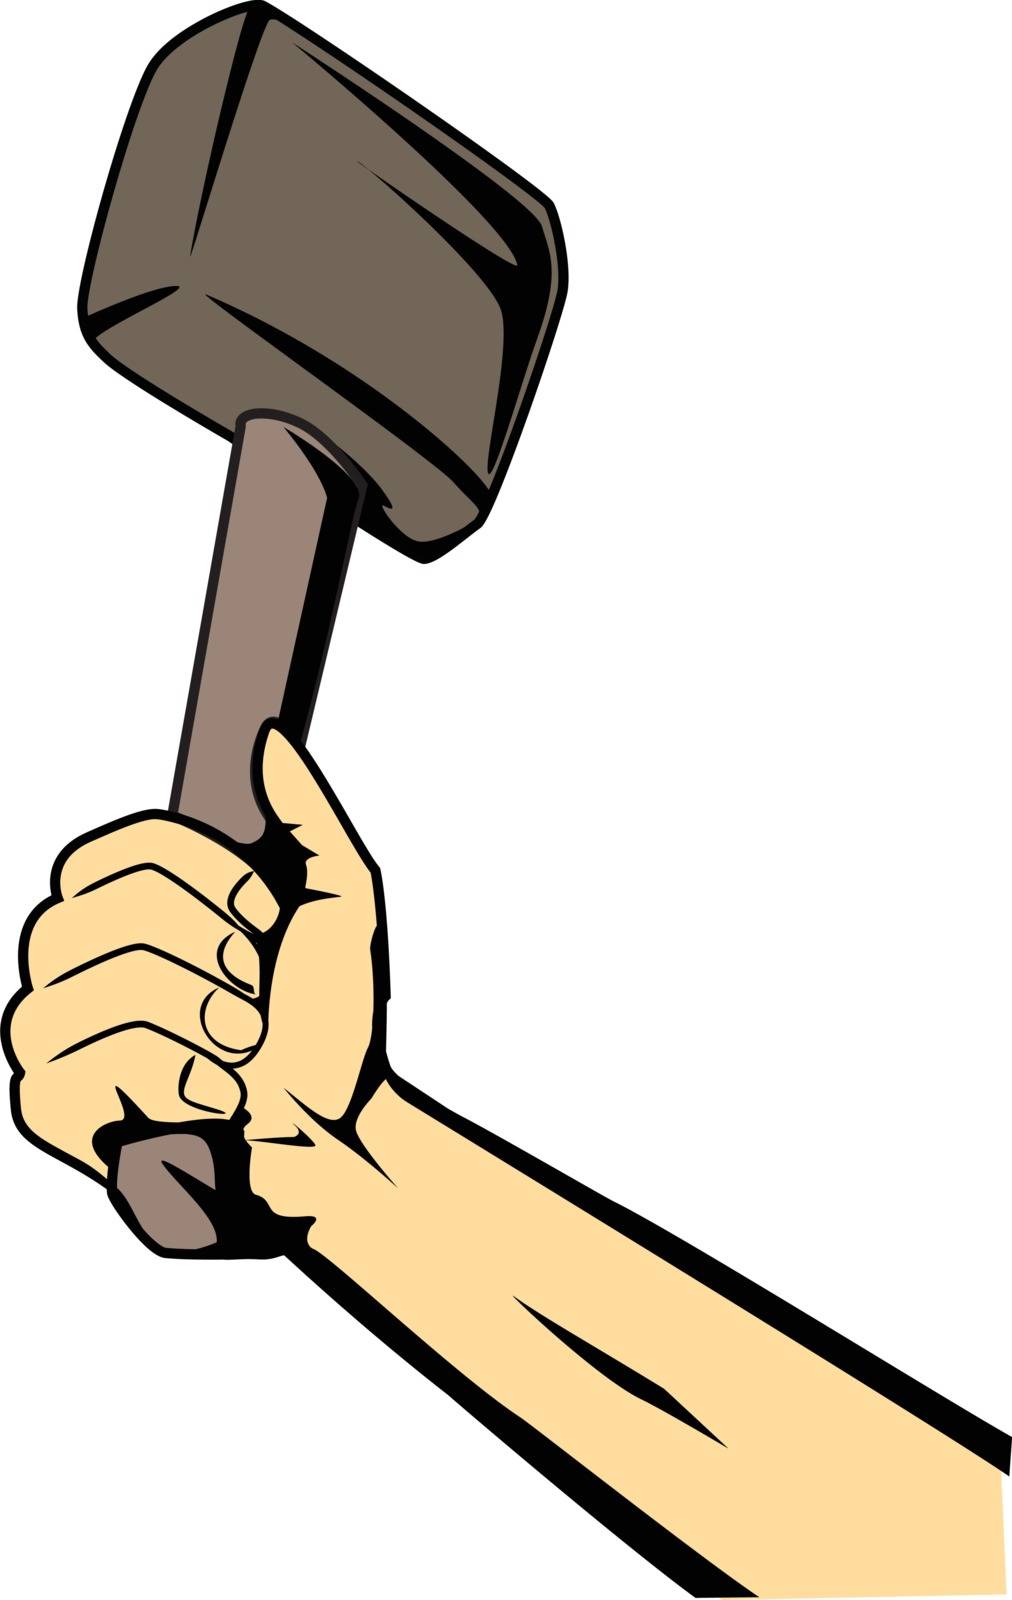 Hammer In Strong Hand Isolated Vector